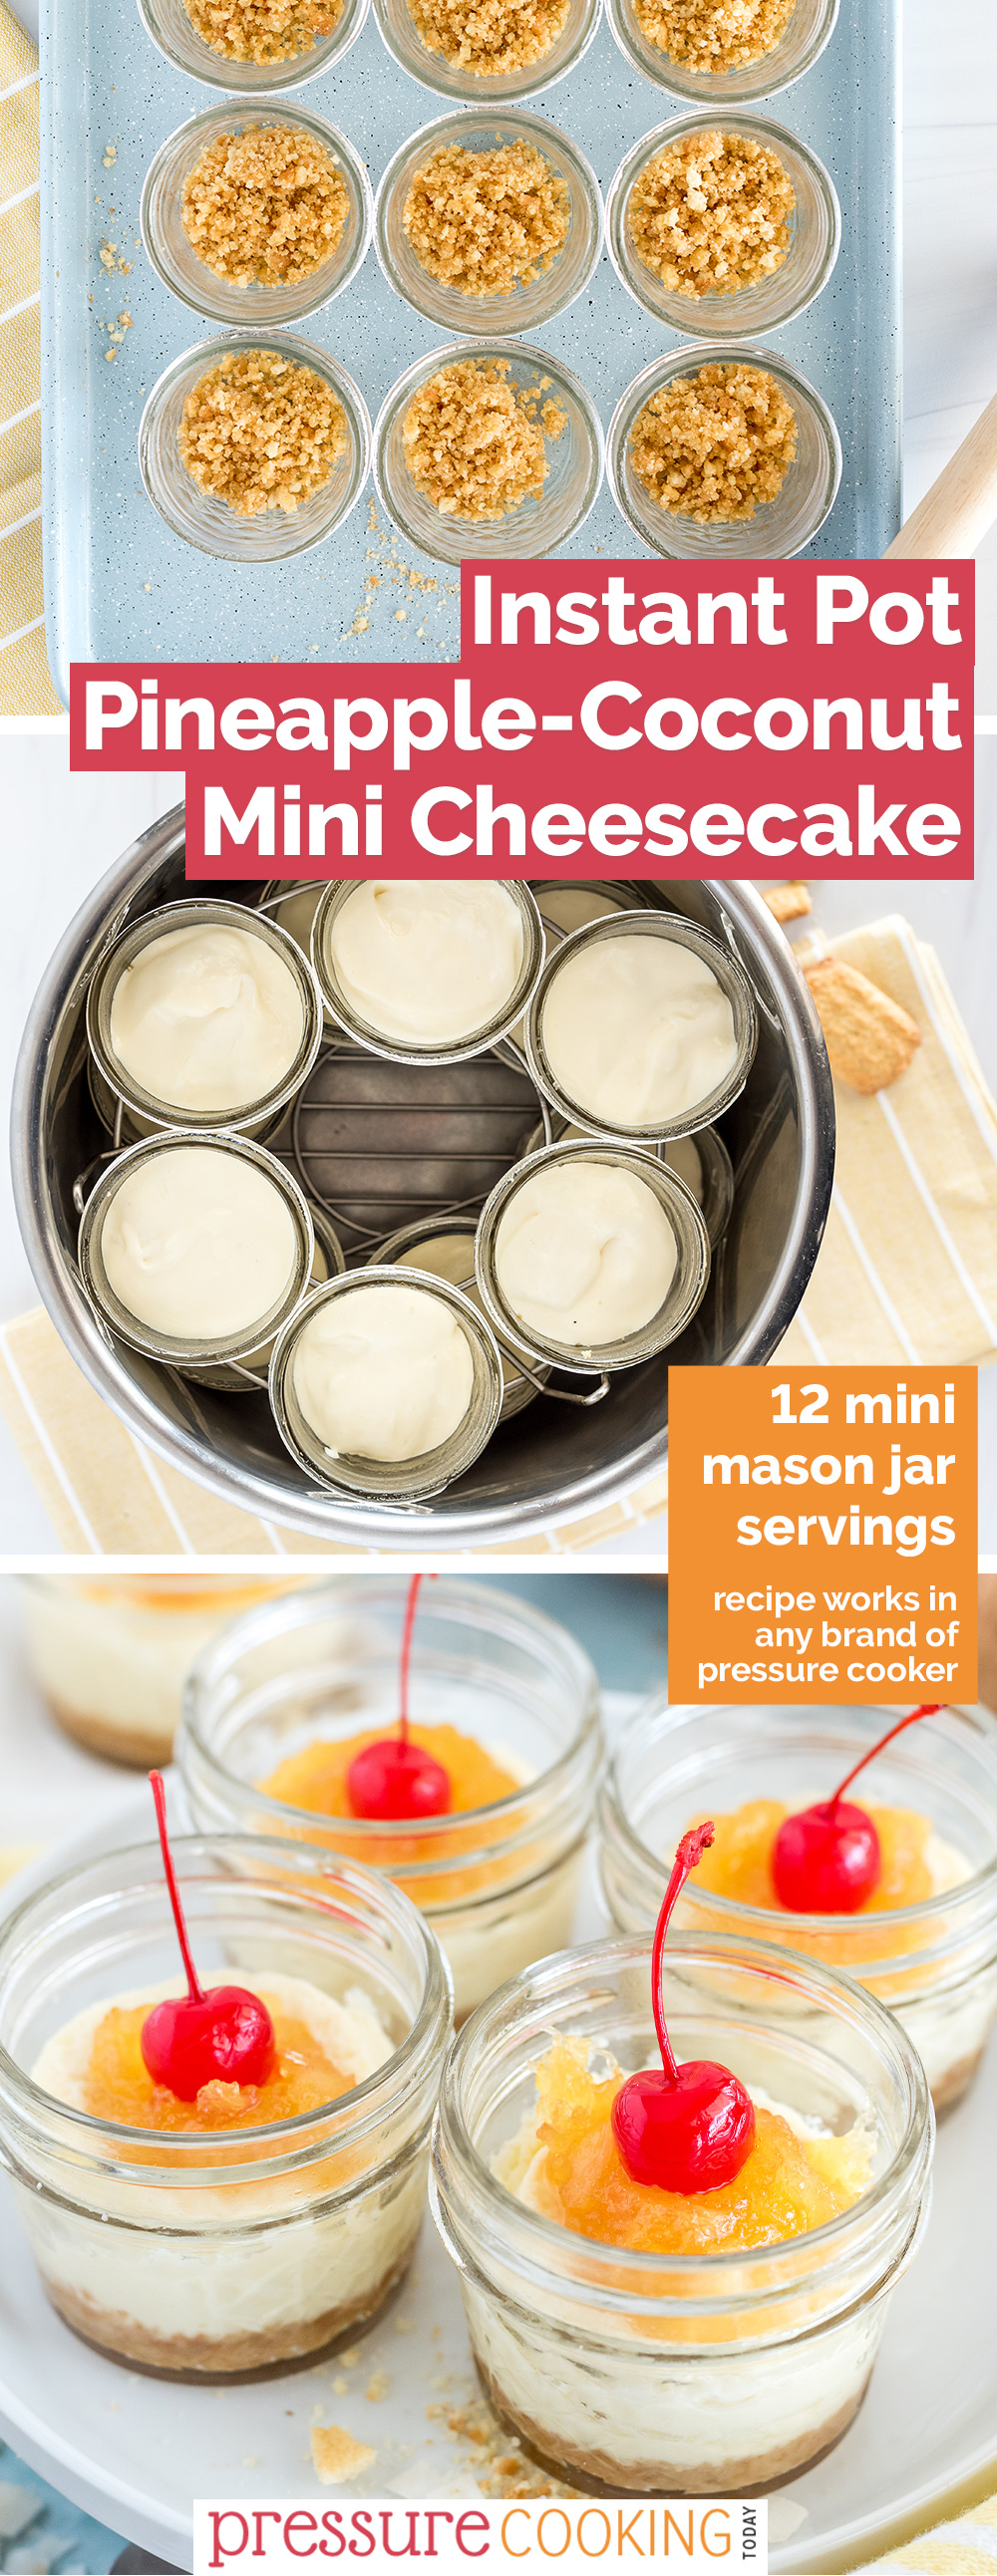 Pinterest image showing how to make INstant Pot mini cheesecakes with a coconut filling and a pineapple topping, with the top photo showing graham cracker crumbs in the Instant Pot, the middle image showing twelve filled cheesecake, and the bottom photo with four mini cheesecakes, topped with a maraschino cherry via @PressureCook2da